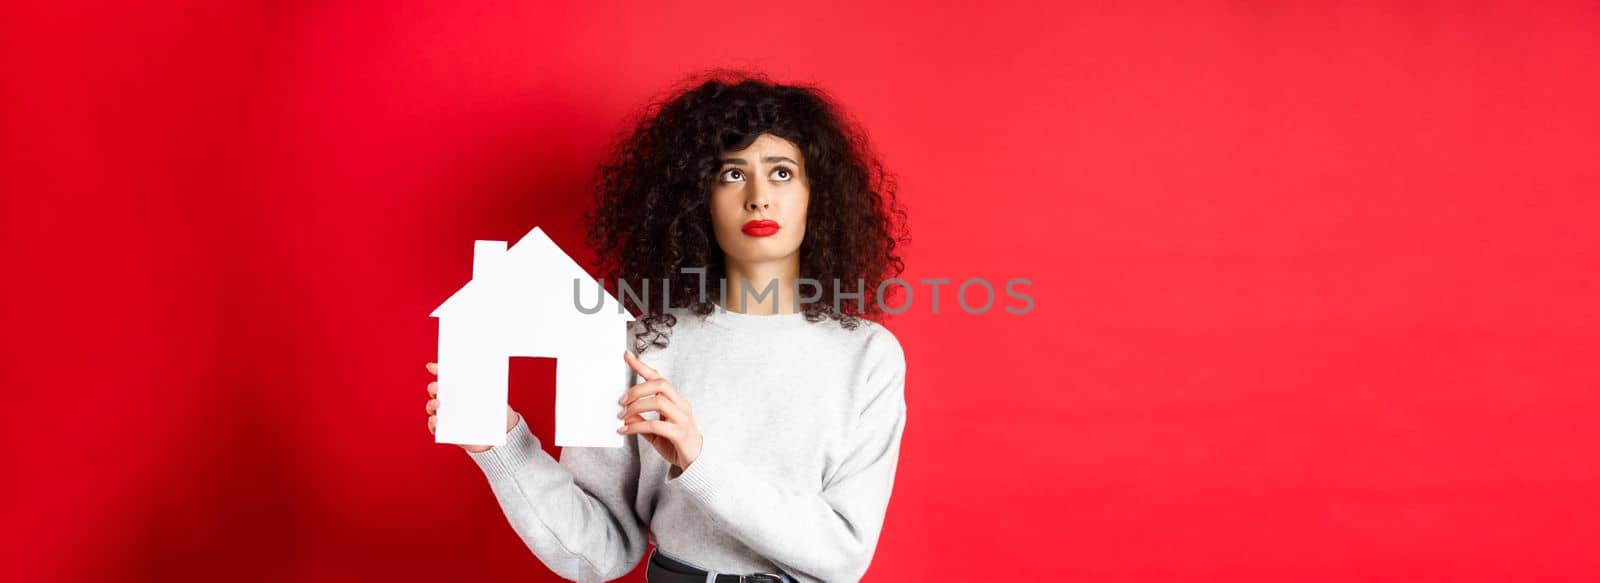 Real estate. Sad woman thinking of buying own house, showing paper home cutout and looking up with uspet face, standing on red background.